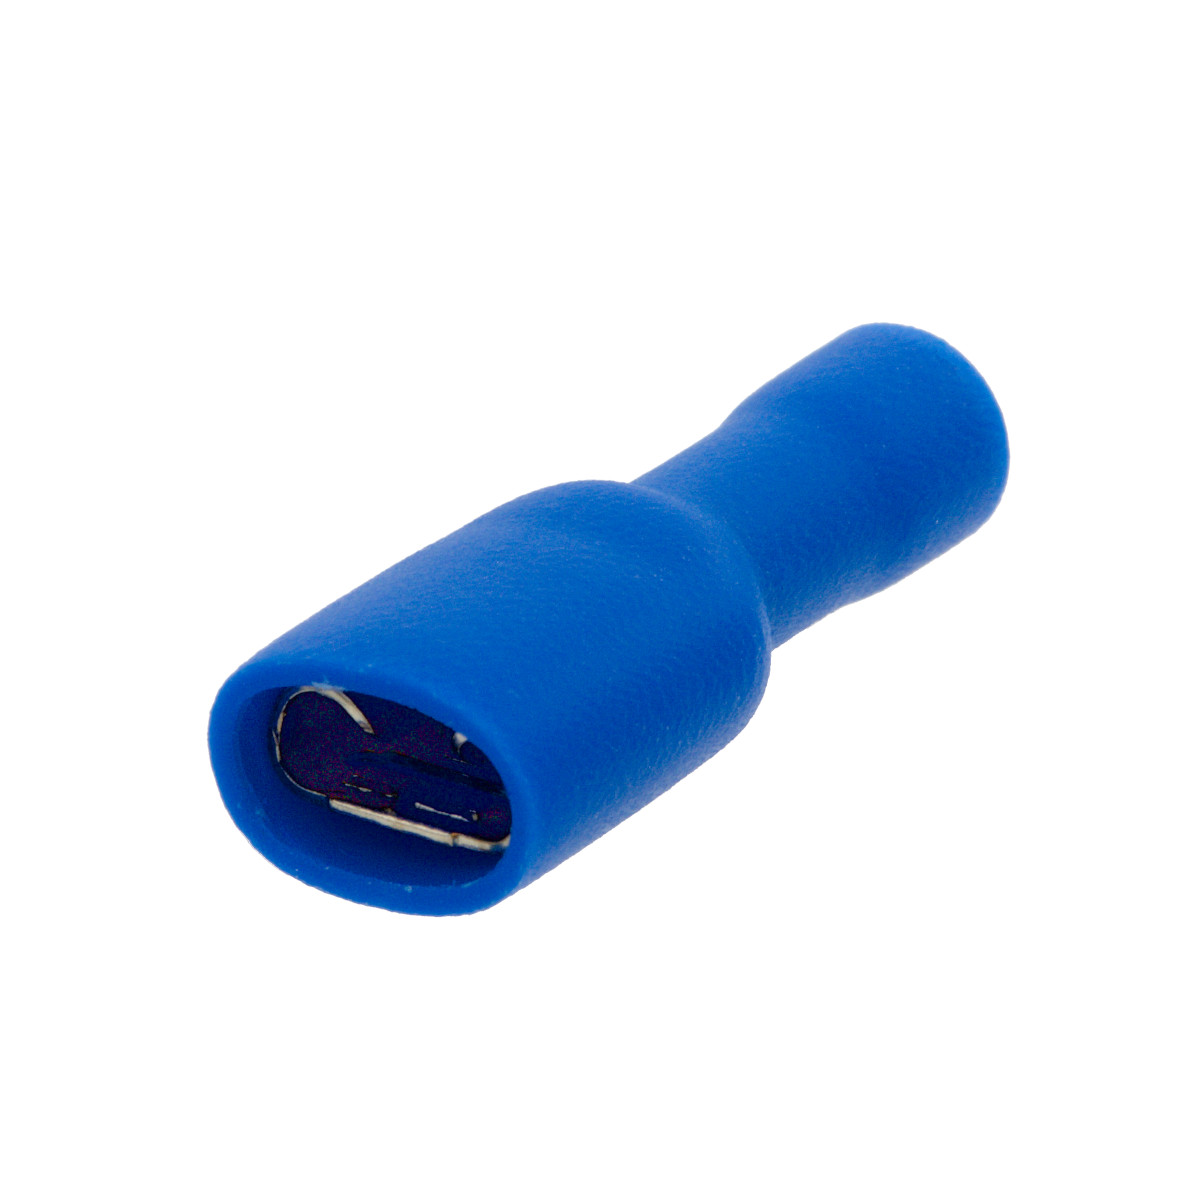 fully insulated FASTON female terminal 6.35mm 15A [100 units]